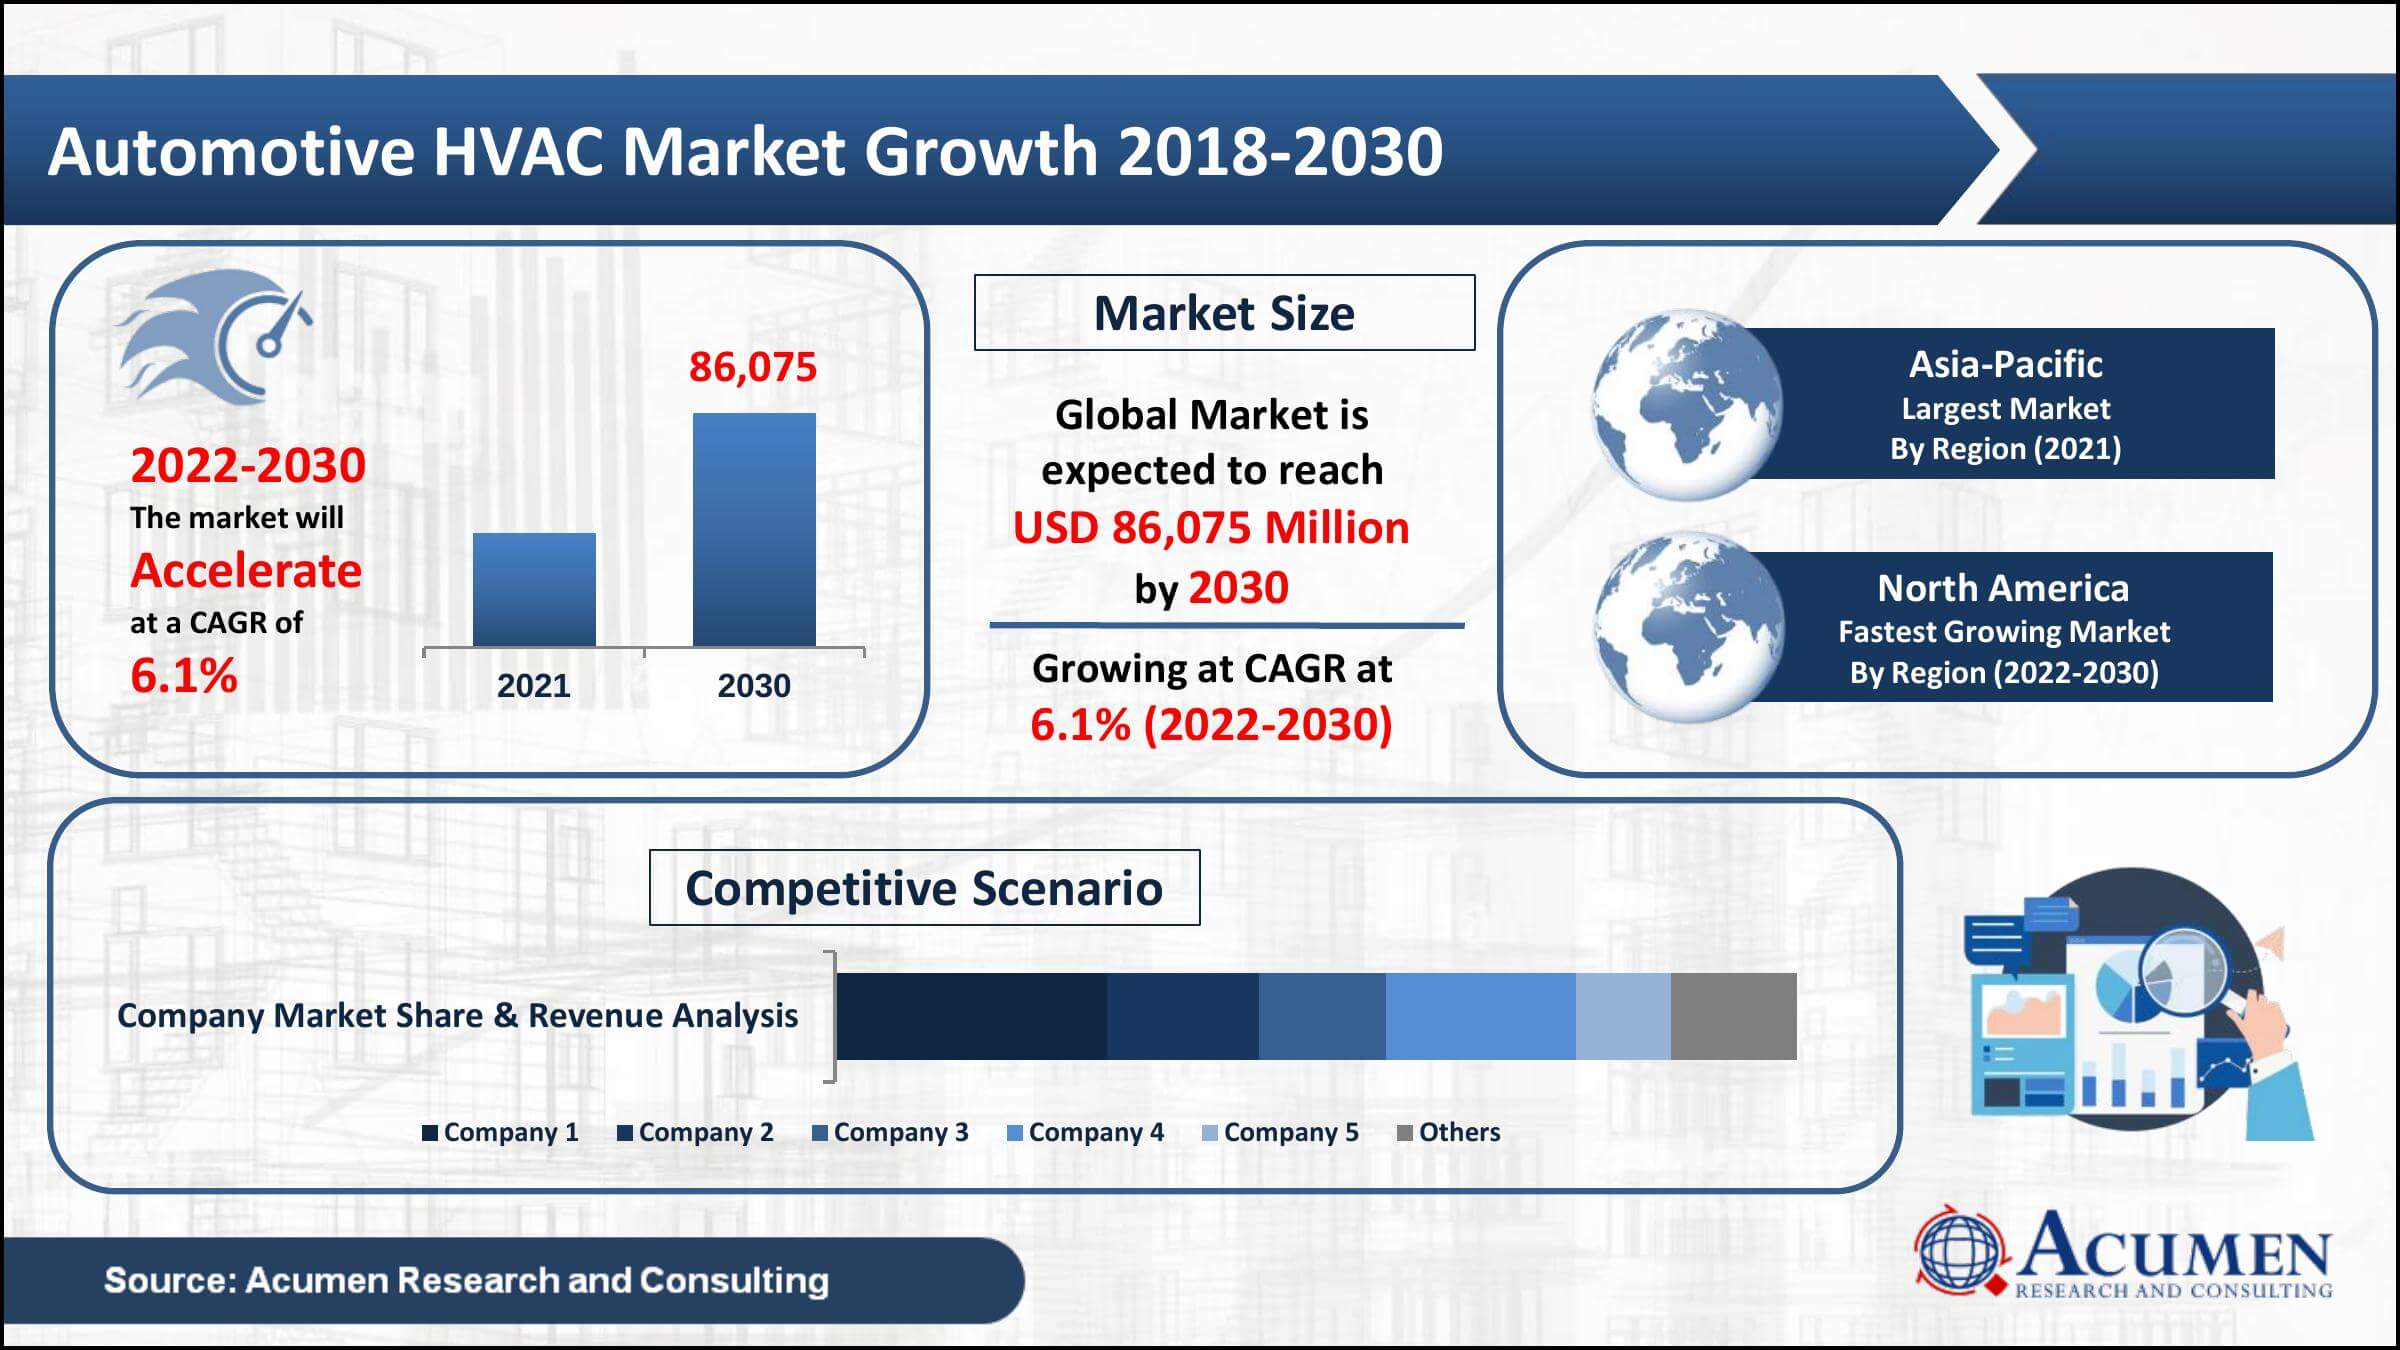 Global automotive HVAC market revenue was worth USD 51,478 Million in 2021, with a 6.1% CAGR from 2022 to 2030